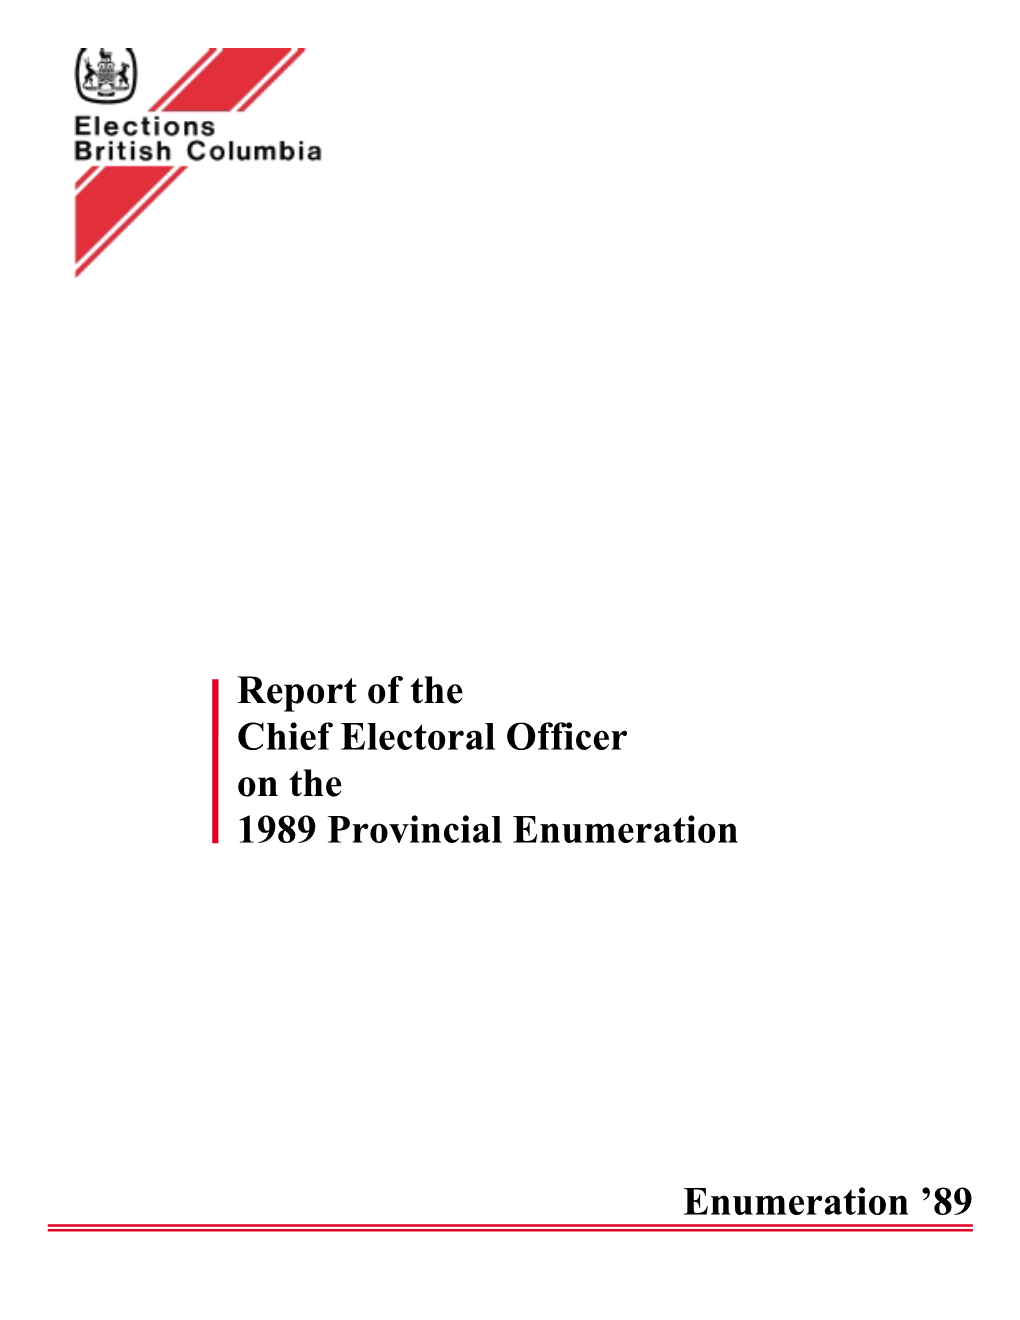 Report of the Chief Electoral Officer on the 1989 Provincial Enumeration